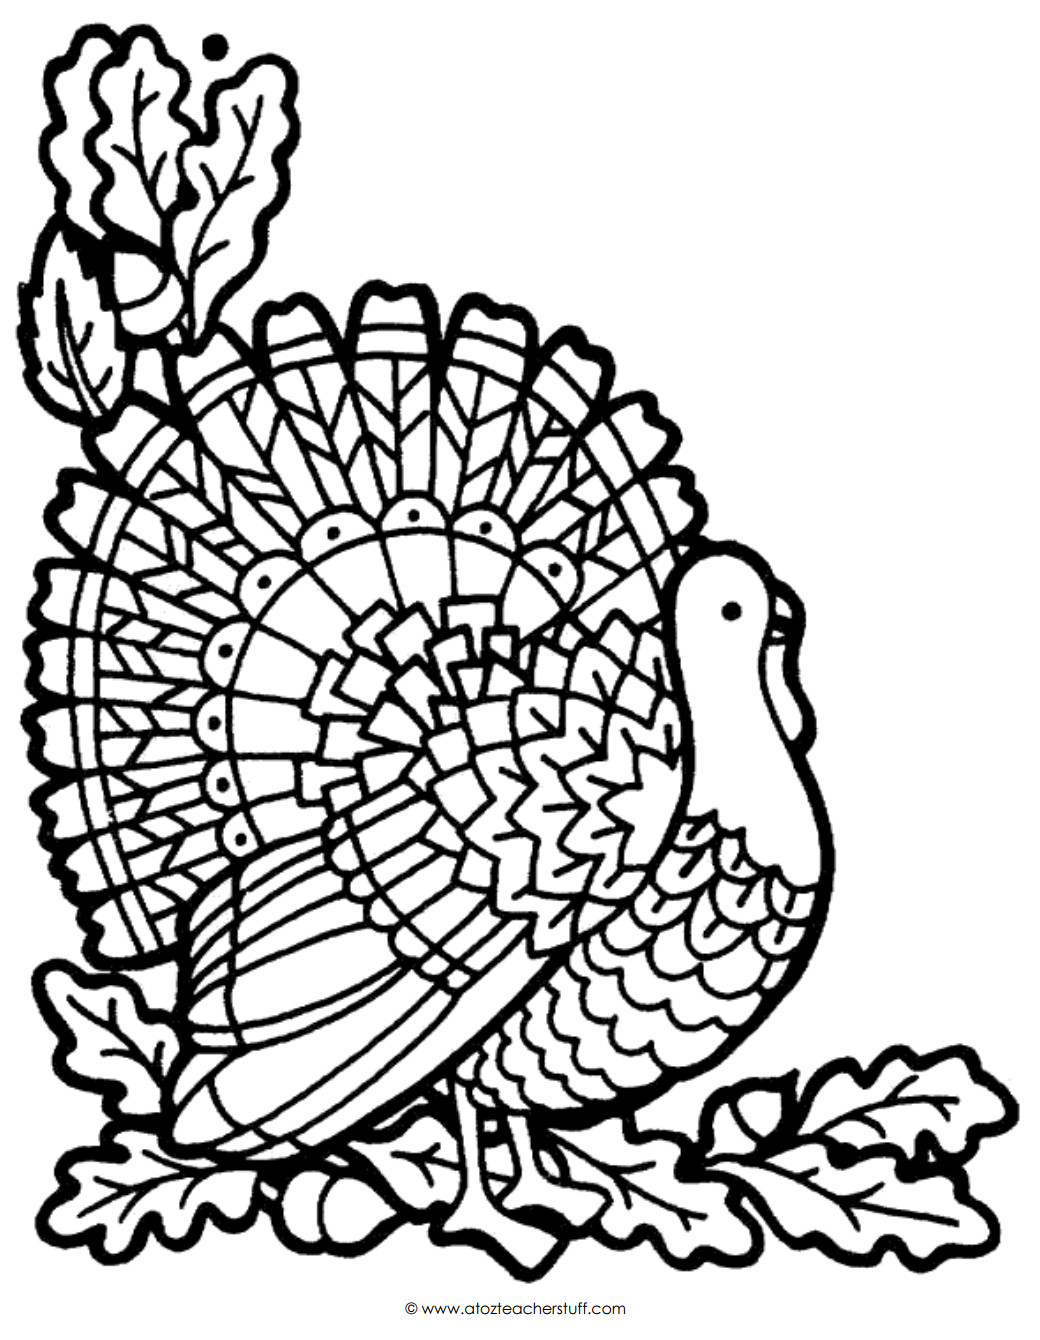 Coloring Pages Turkey
 Turkey Coloring Page